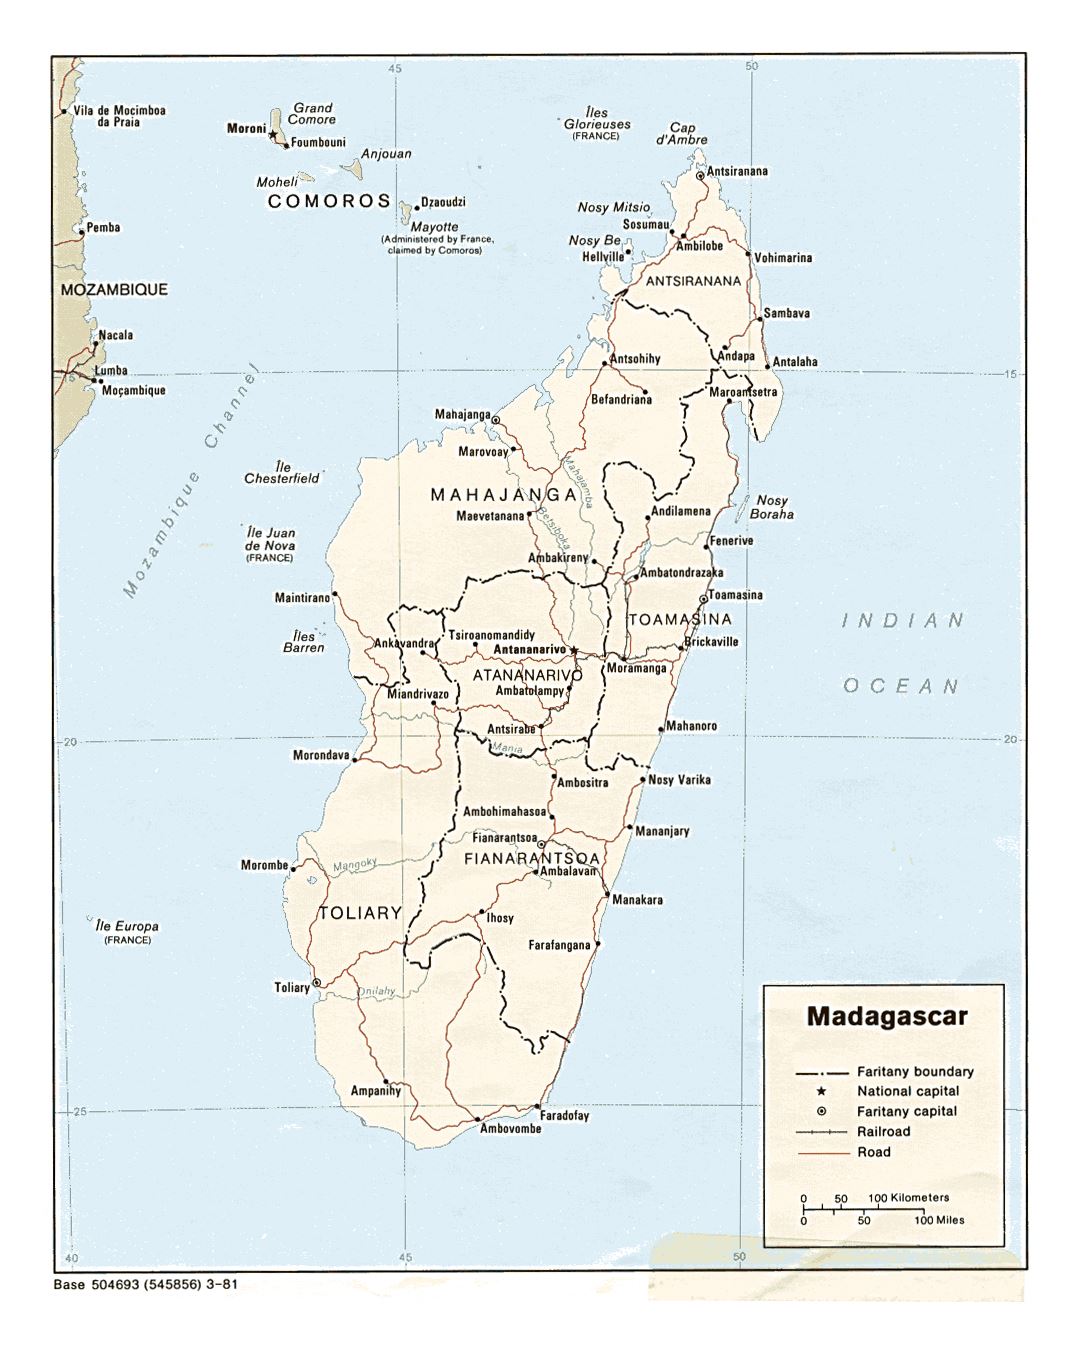 Detailed political and administrative map of Madagascar with roads, railroads and major cities - 1981